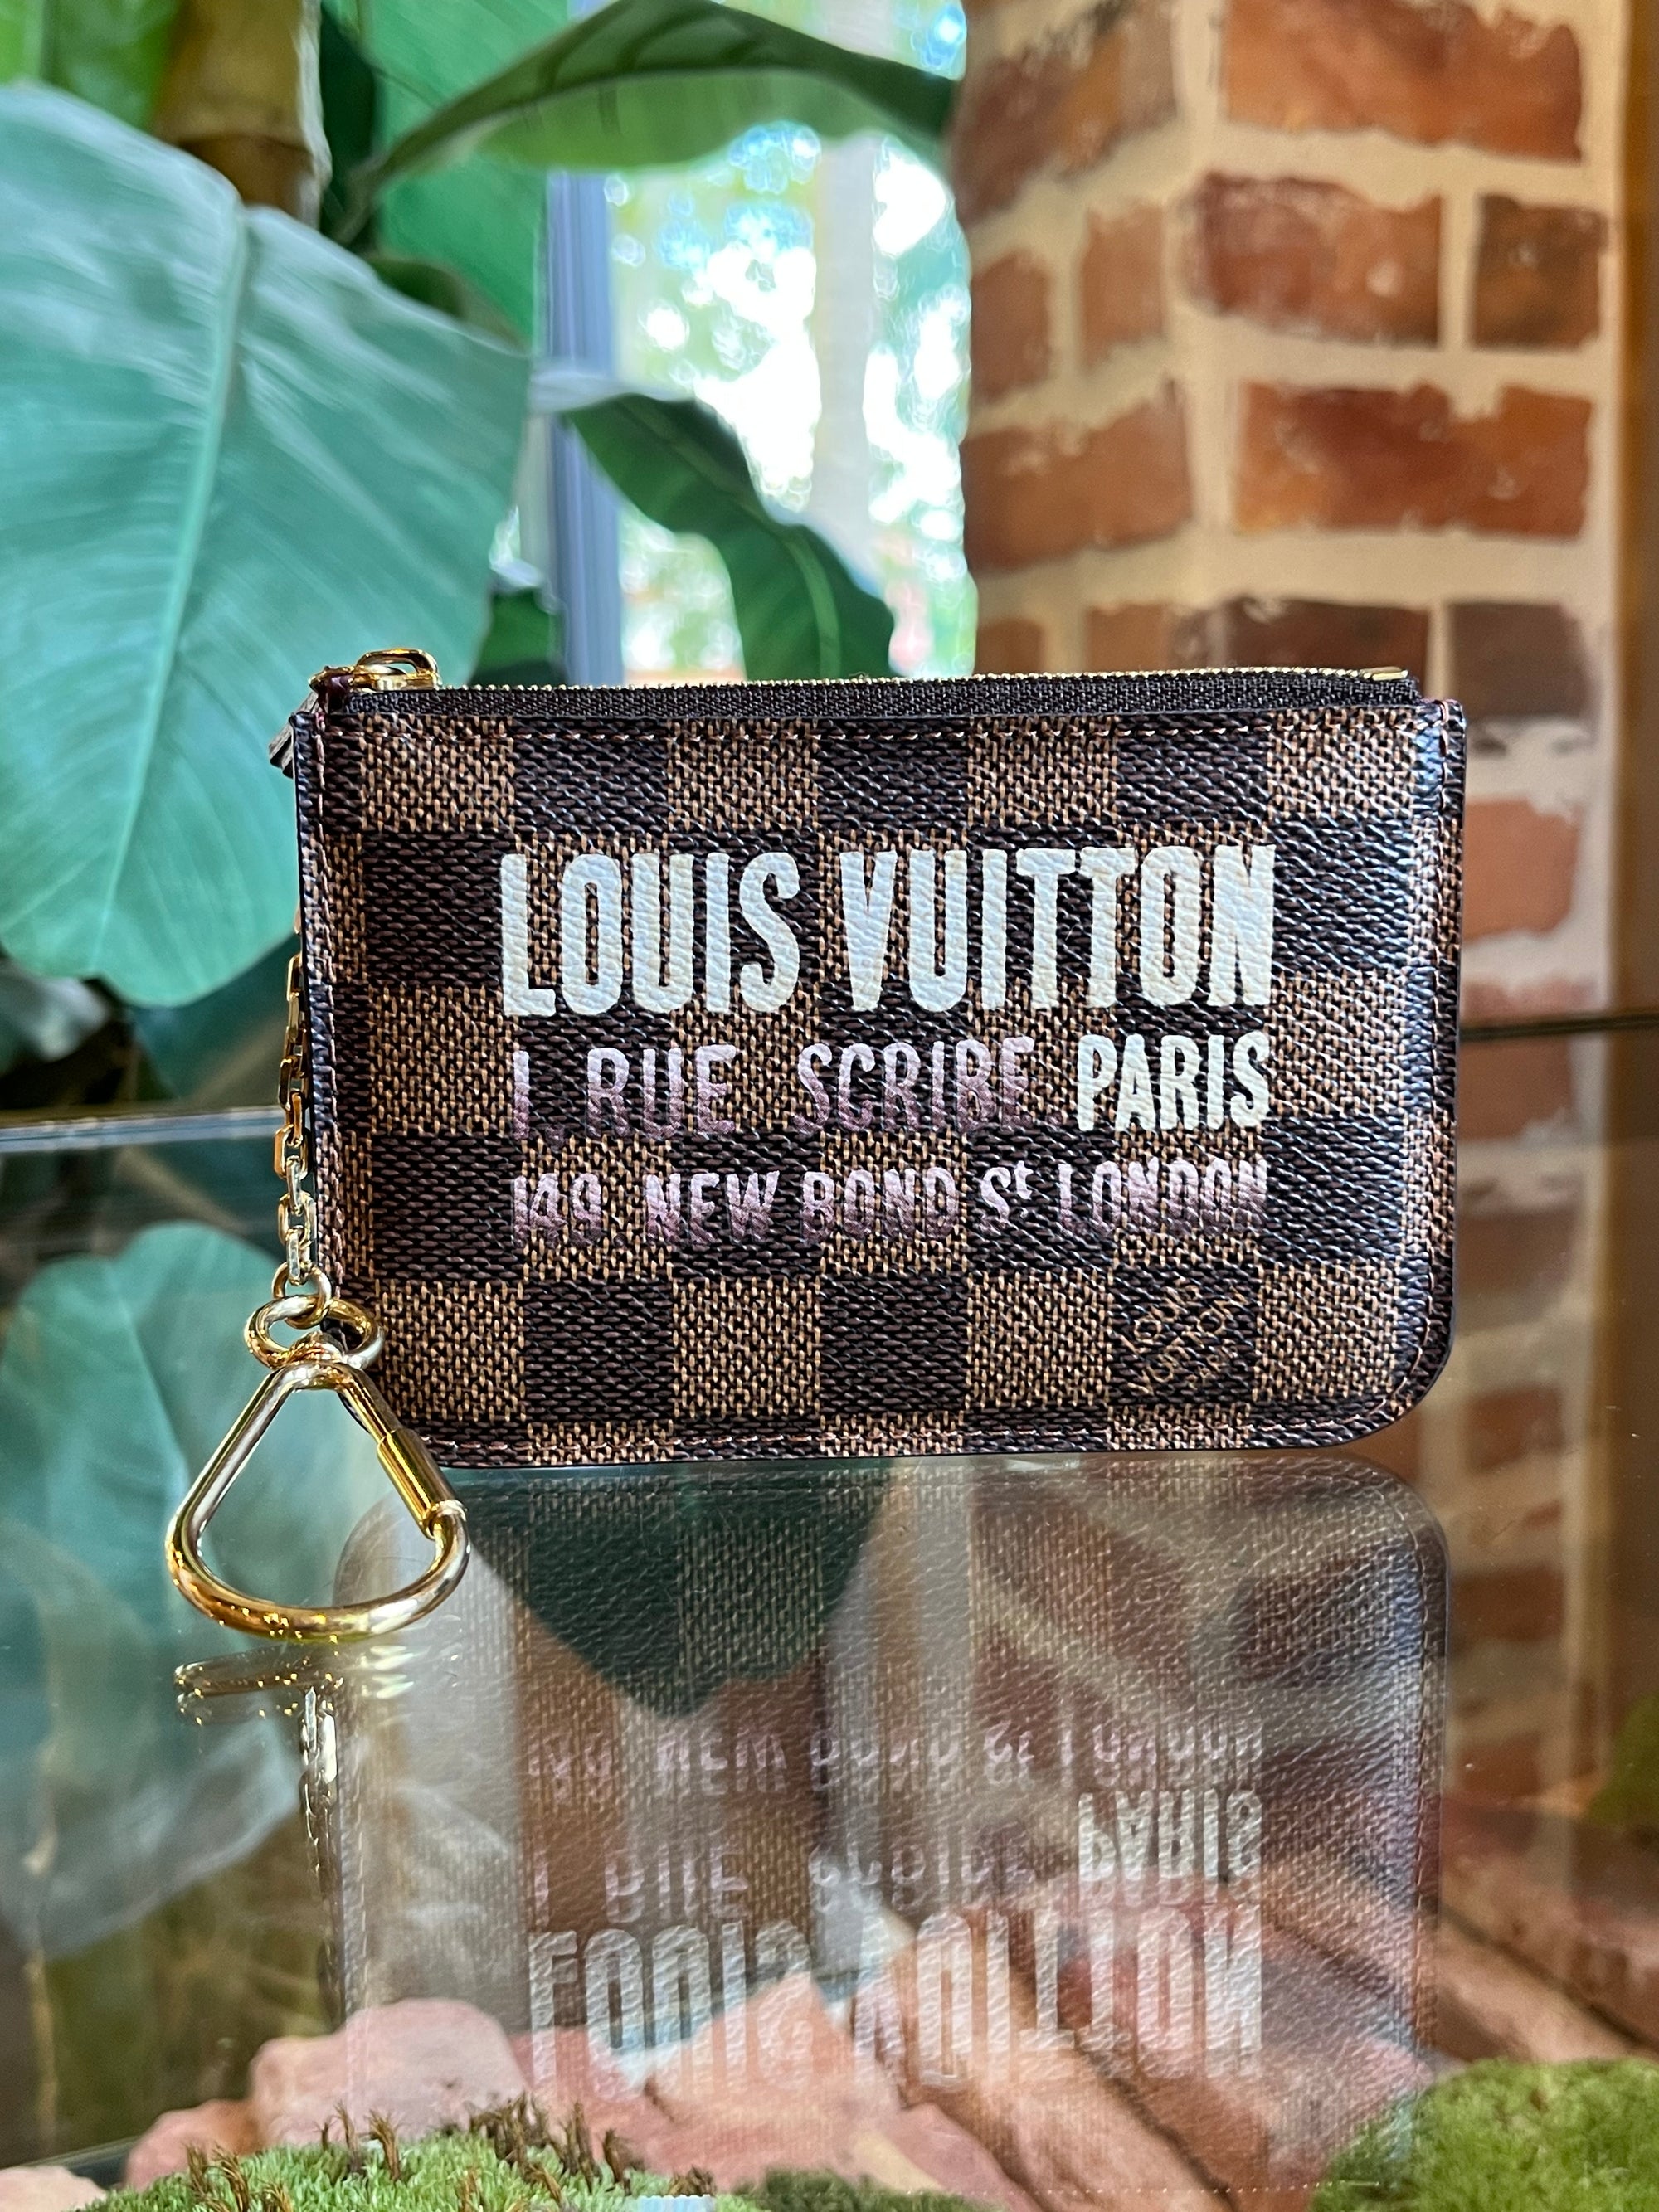 Louis Vuitton Lorette Monogram Bag US$ 971 Explore the full catalogue of  bags, clothes, jewelry and accessories at vinvoy.com (active link…